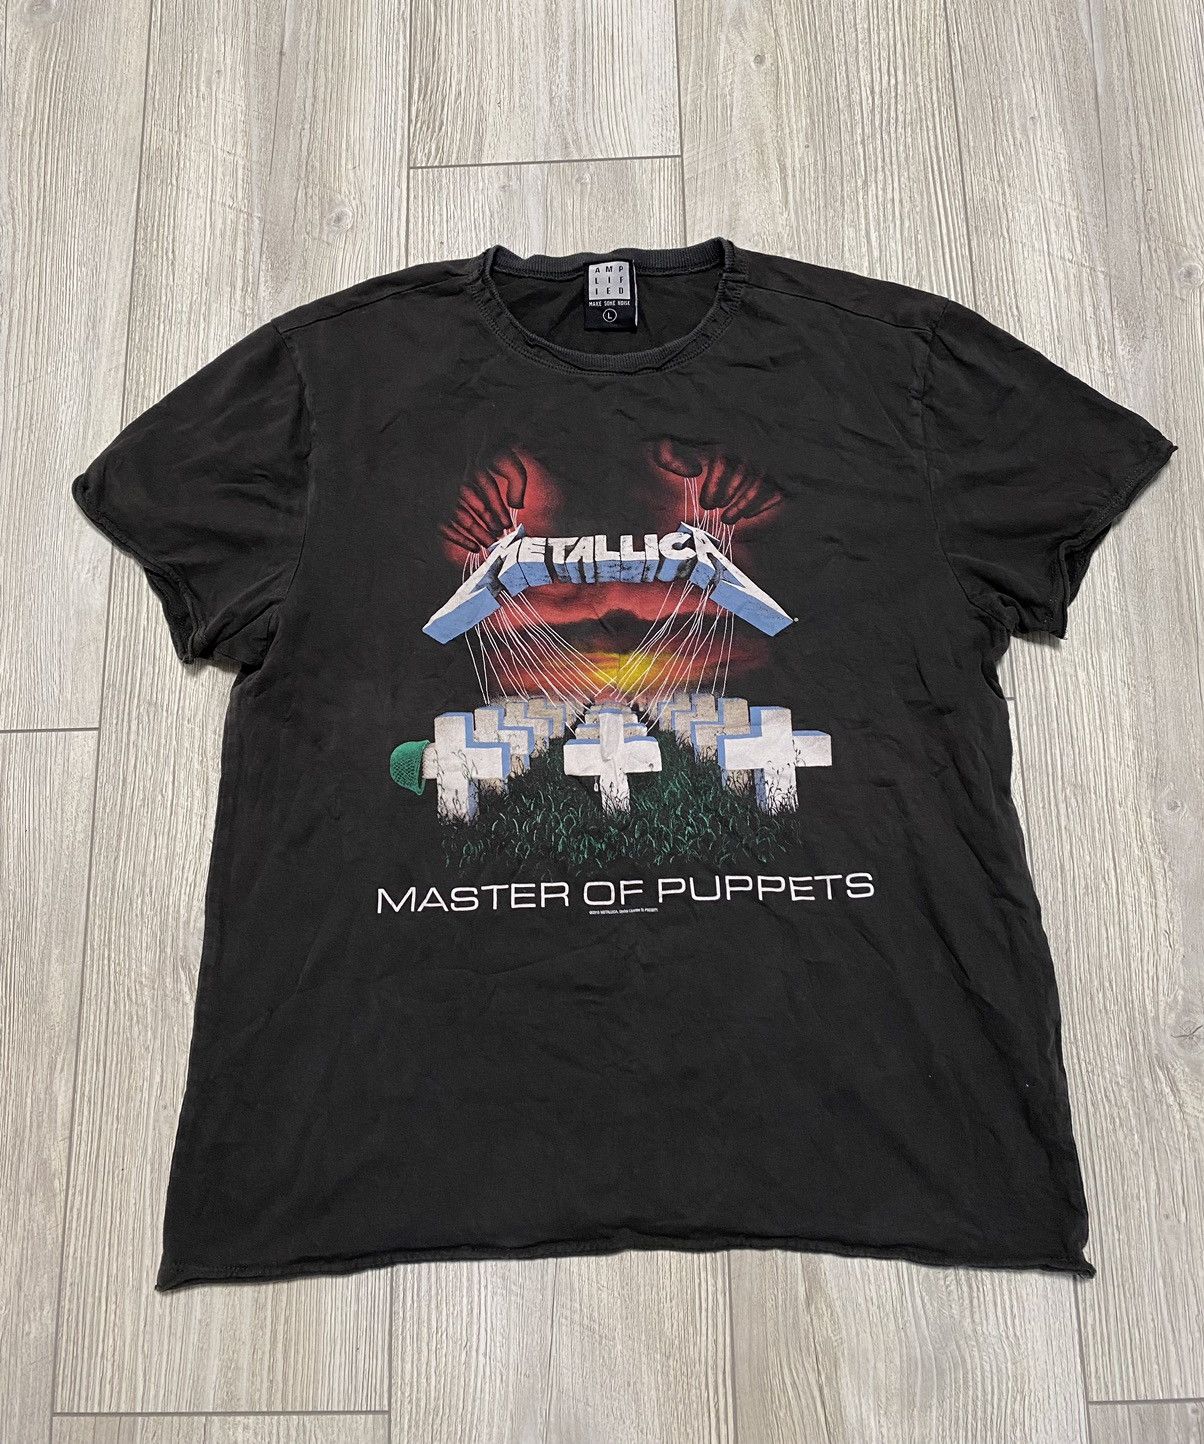 Pre-owned Band Tees X Metallica Master Of Puppers Vintage T Shirt 2015 In Black